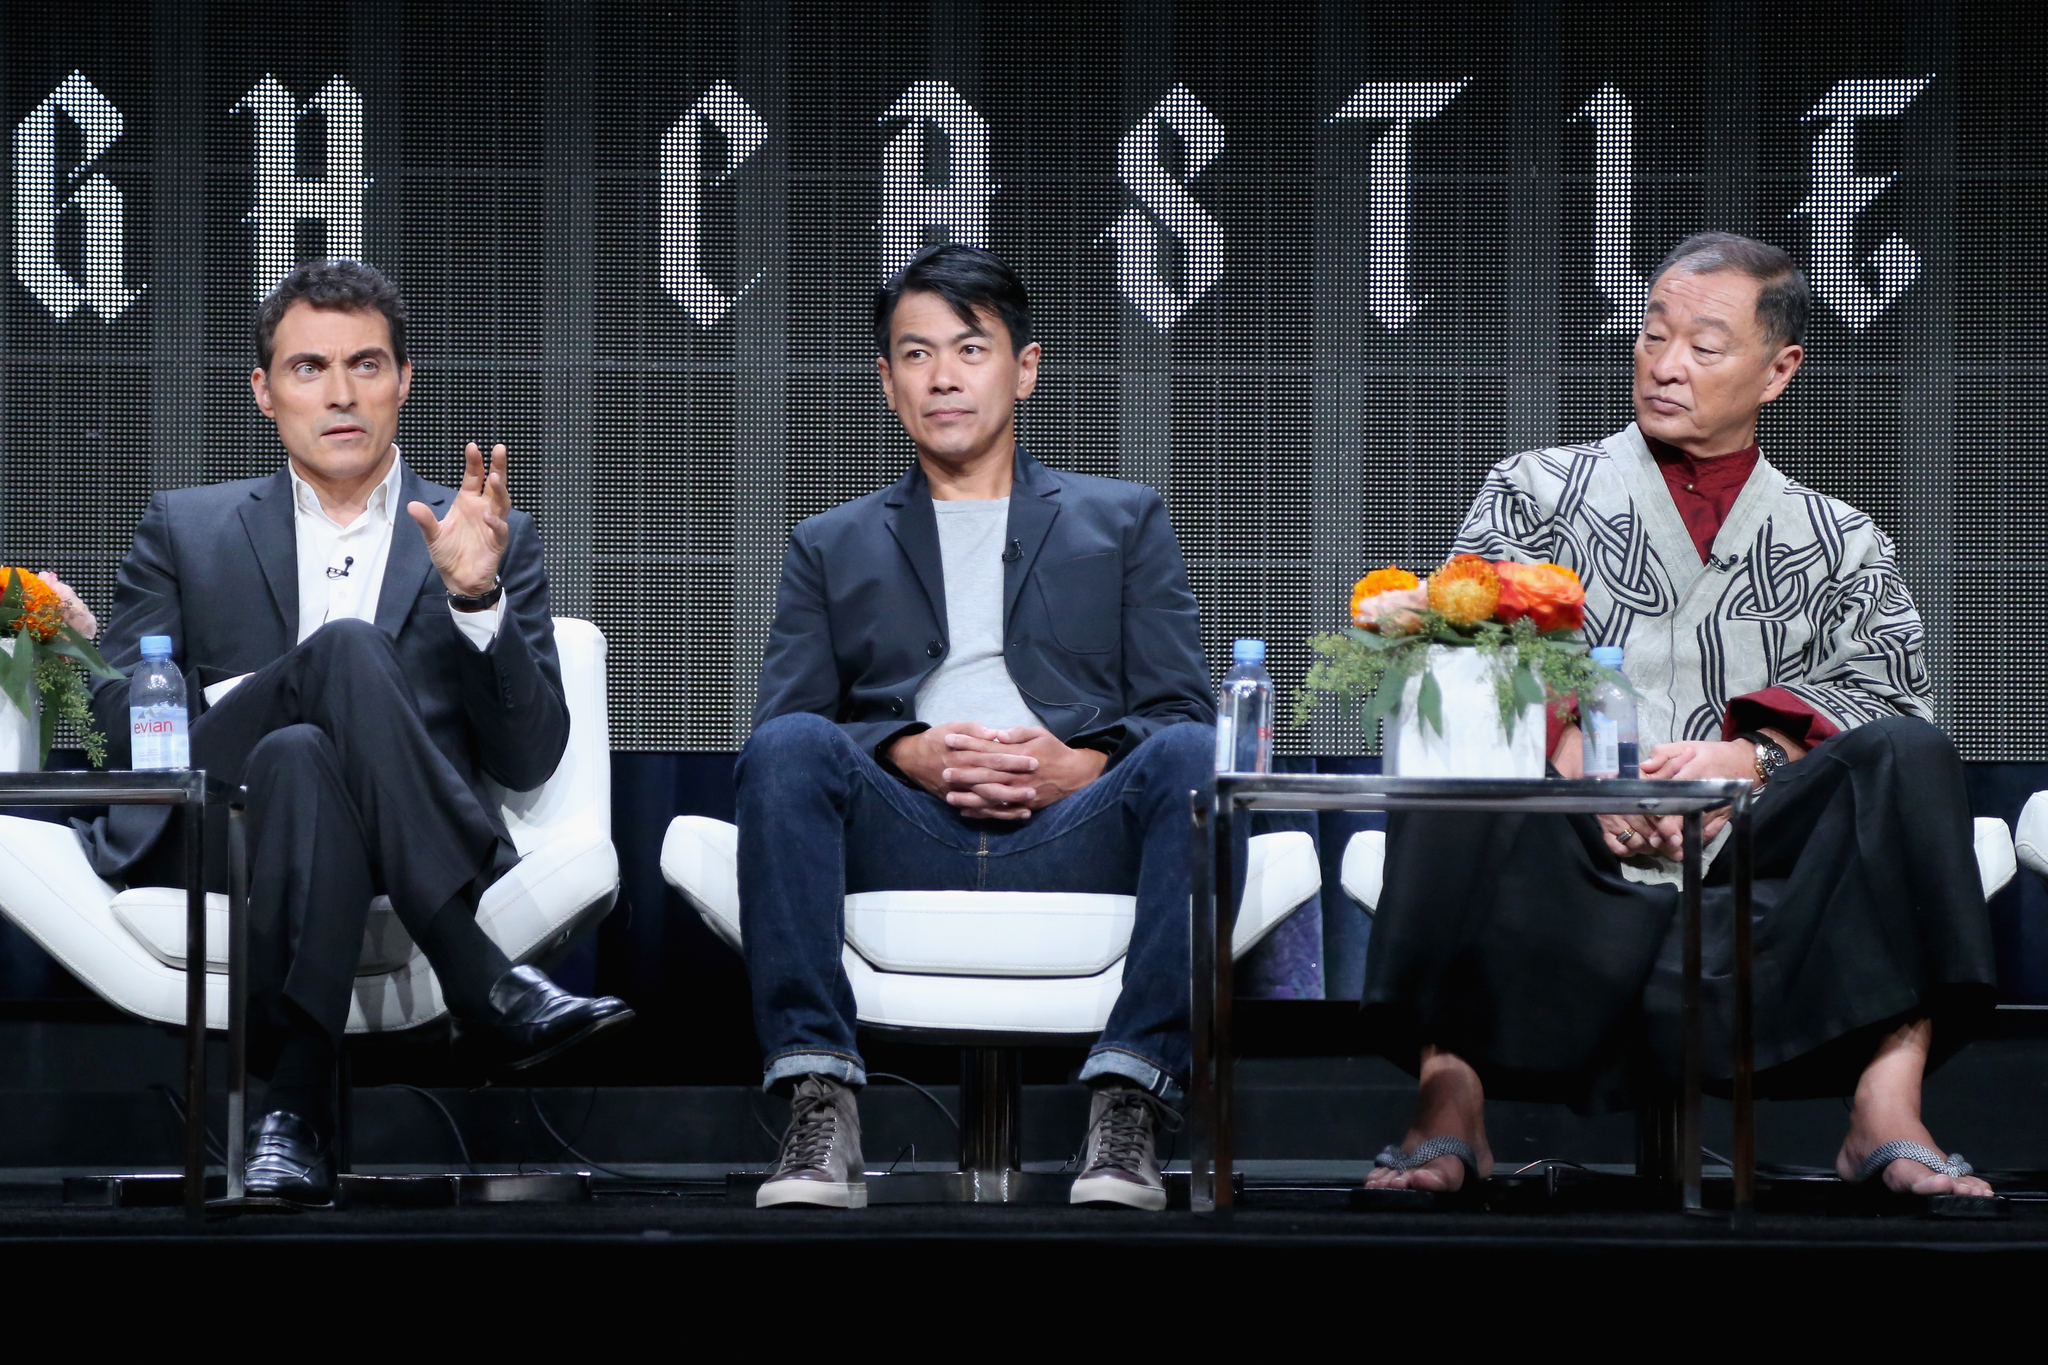 Rufus Sewell, Joel de la Fuente and Cary-Hiroyuki Tagawa at event of The Man in the High Castle (2015)